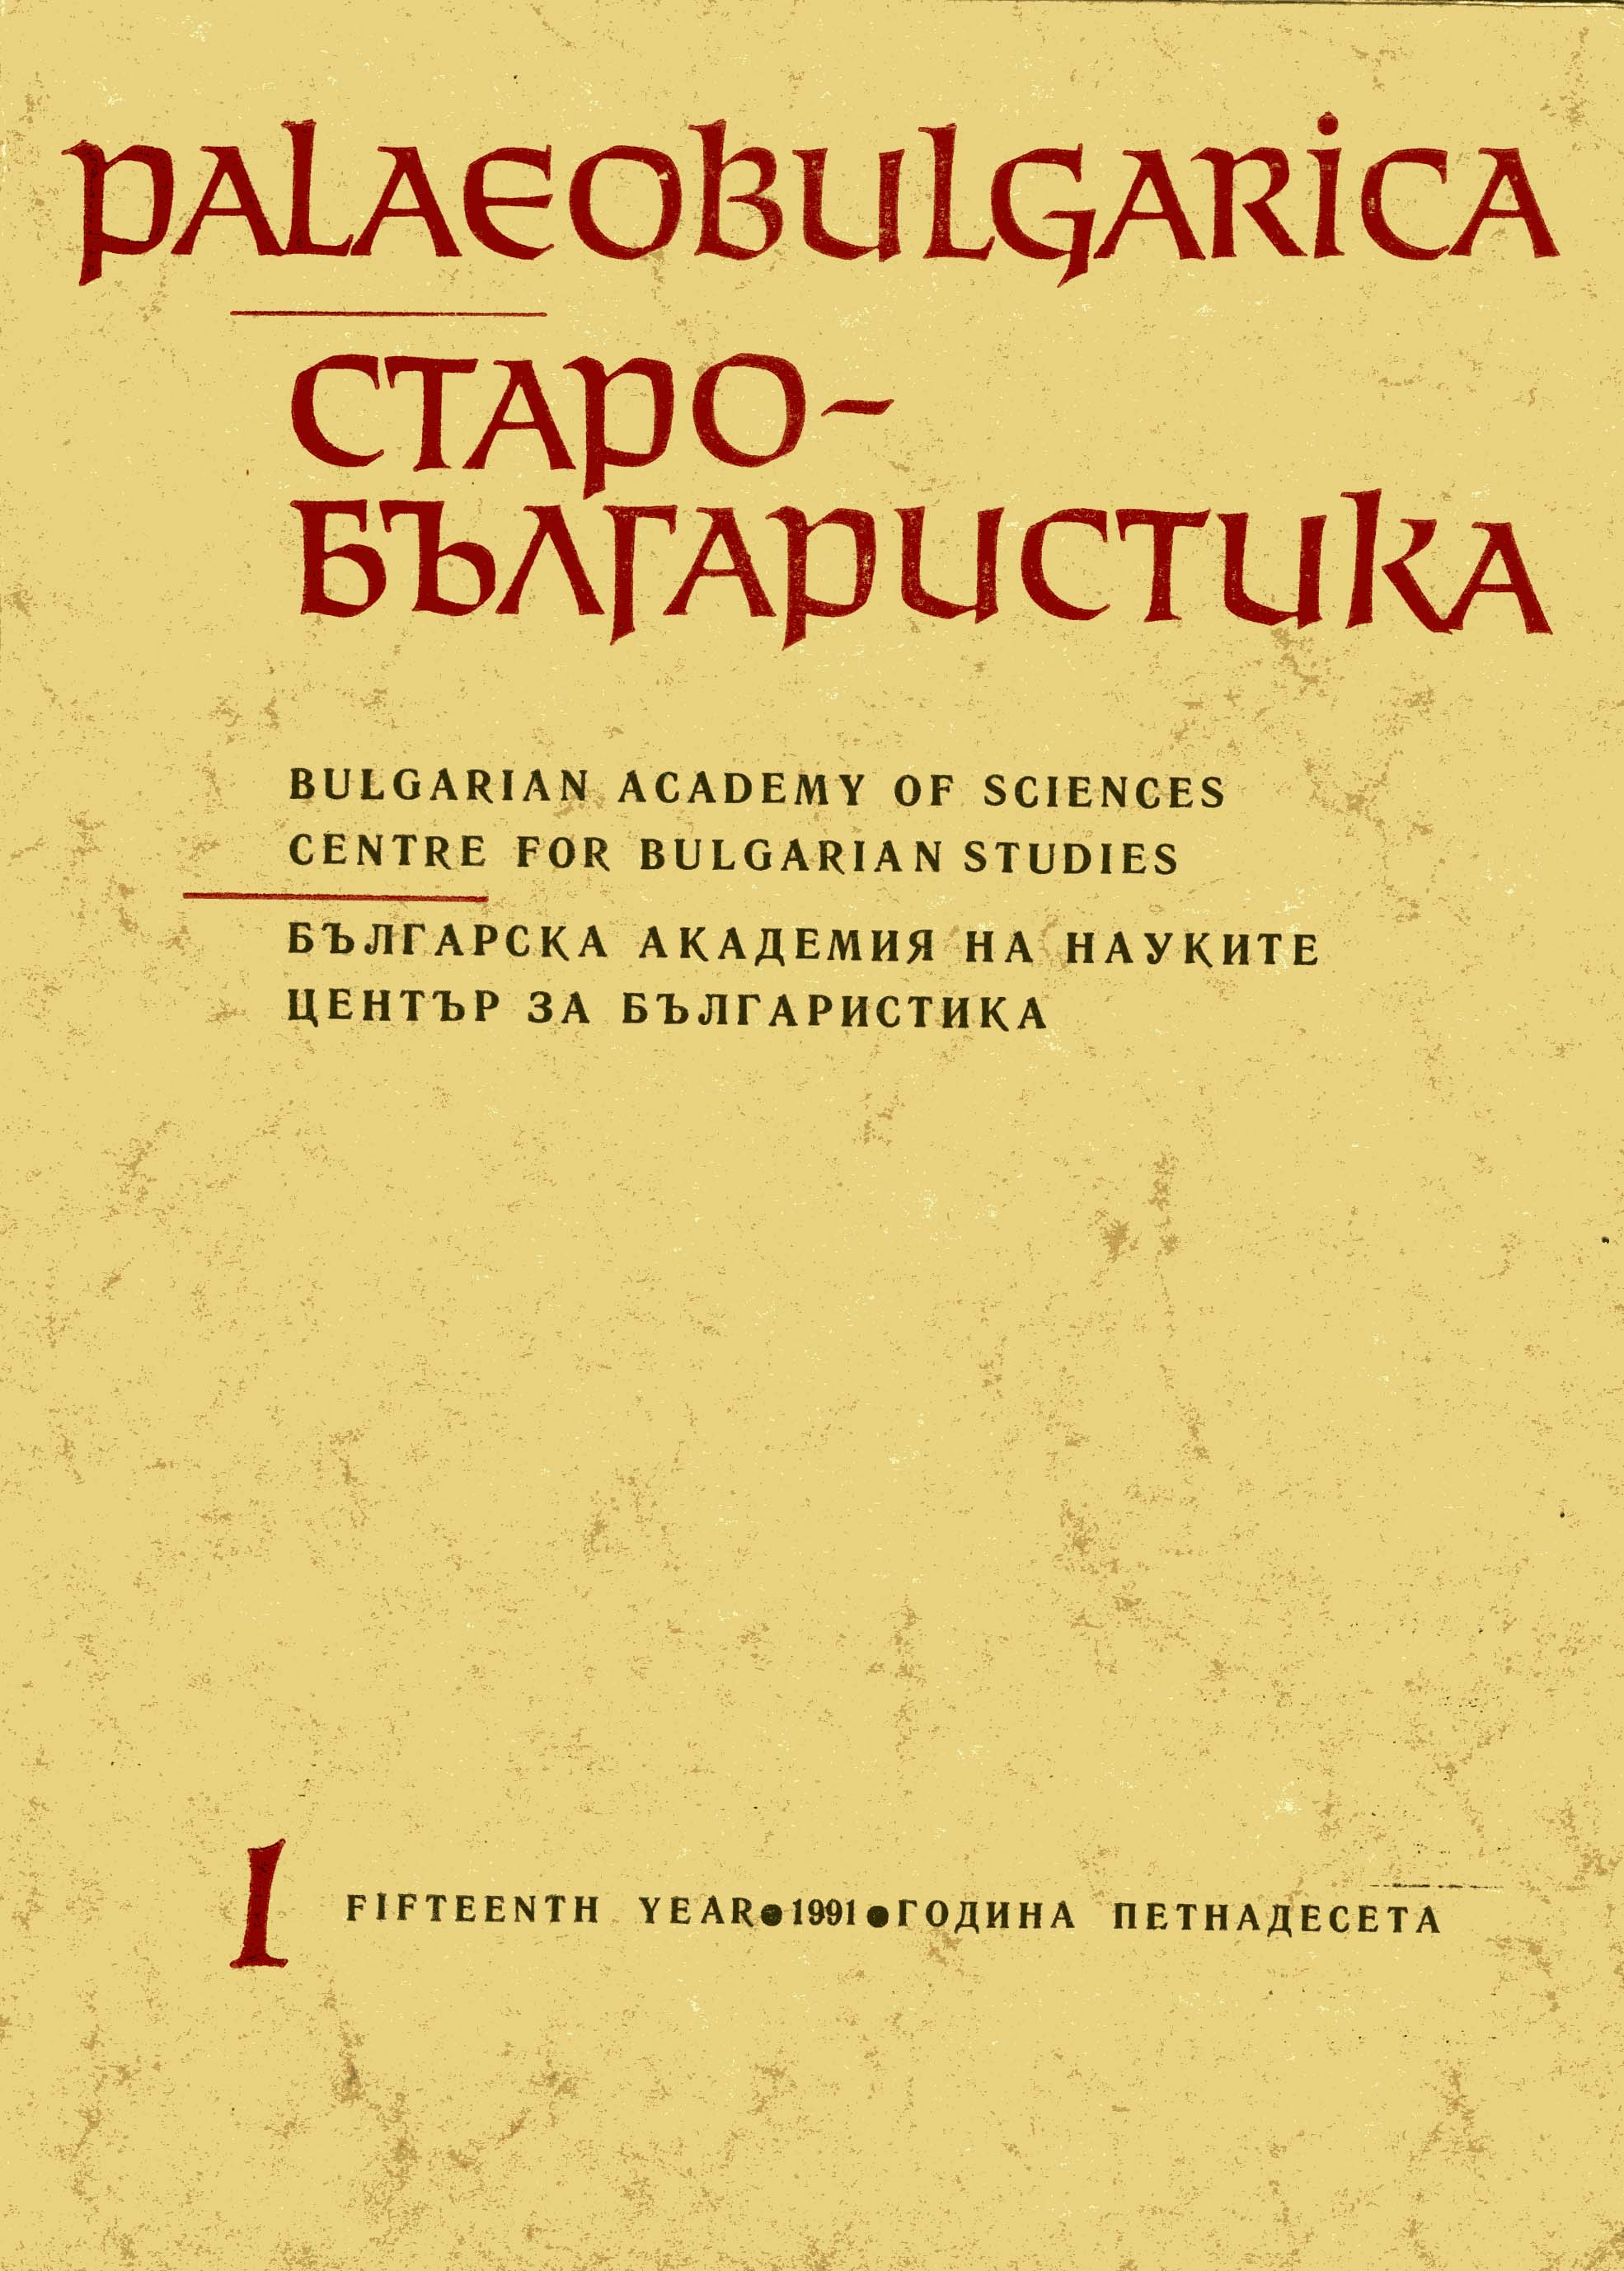 John the Exarch's Theological Education and Proficiency in Greek as Revealed by His Abridged Translation of John of Damascus’ ‘De fide orthodoxa’ Cover Image